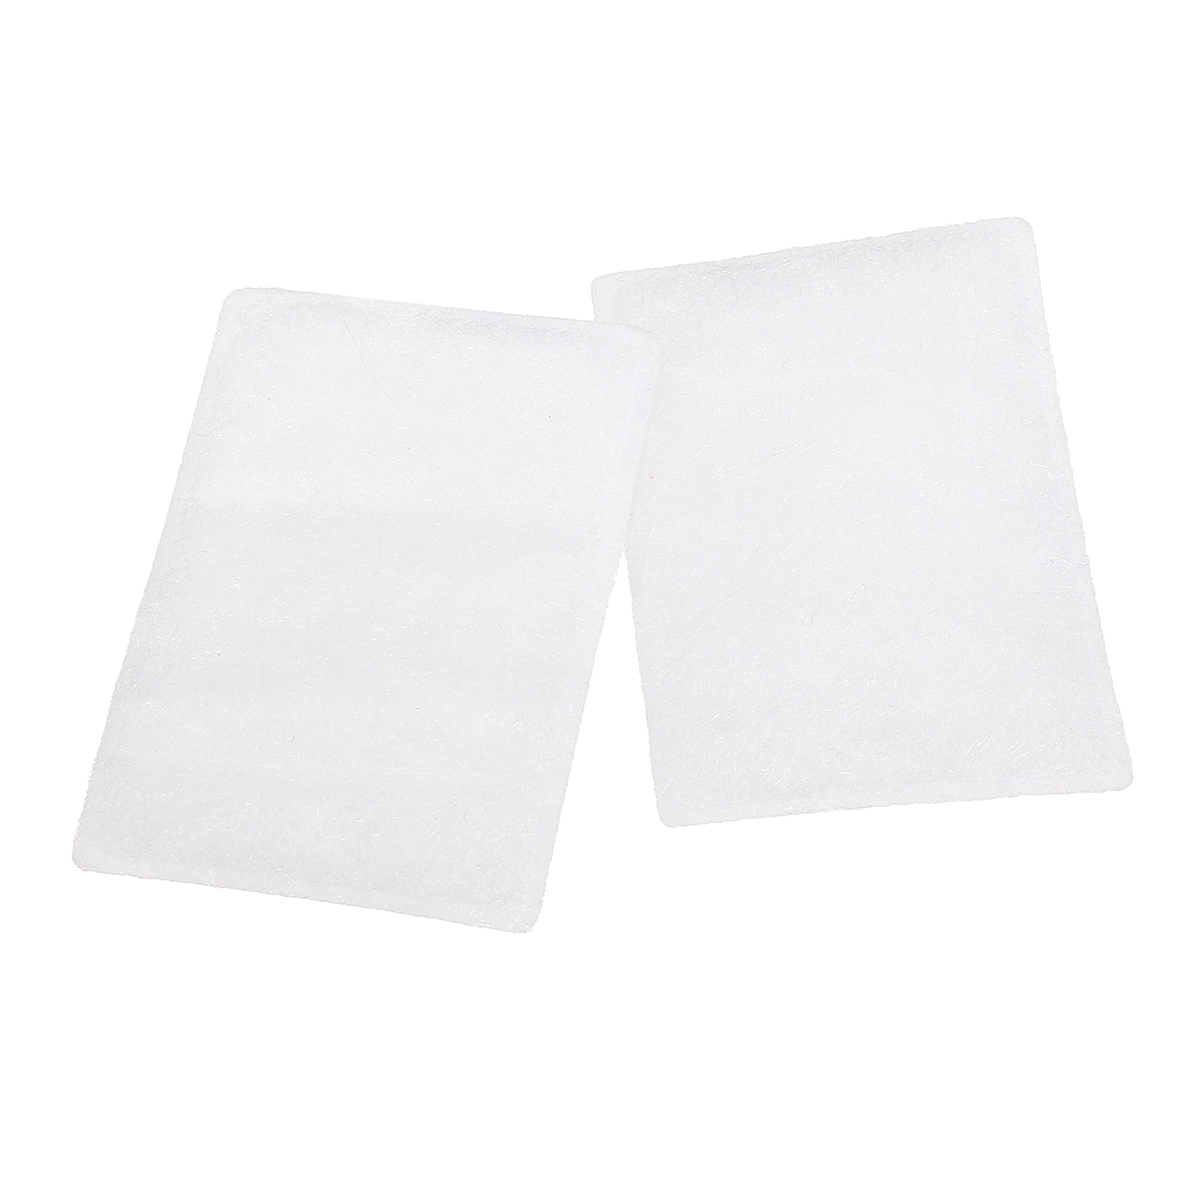 20pcs-Disposable-Universal-Replacement-Filter-For-S9S10-ResMed-AirSense-1363620-4